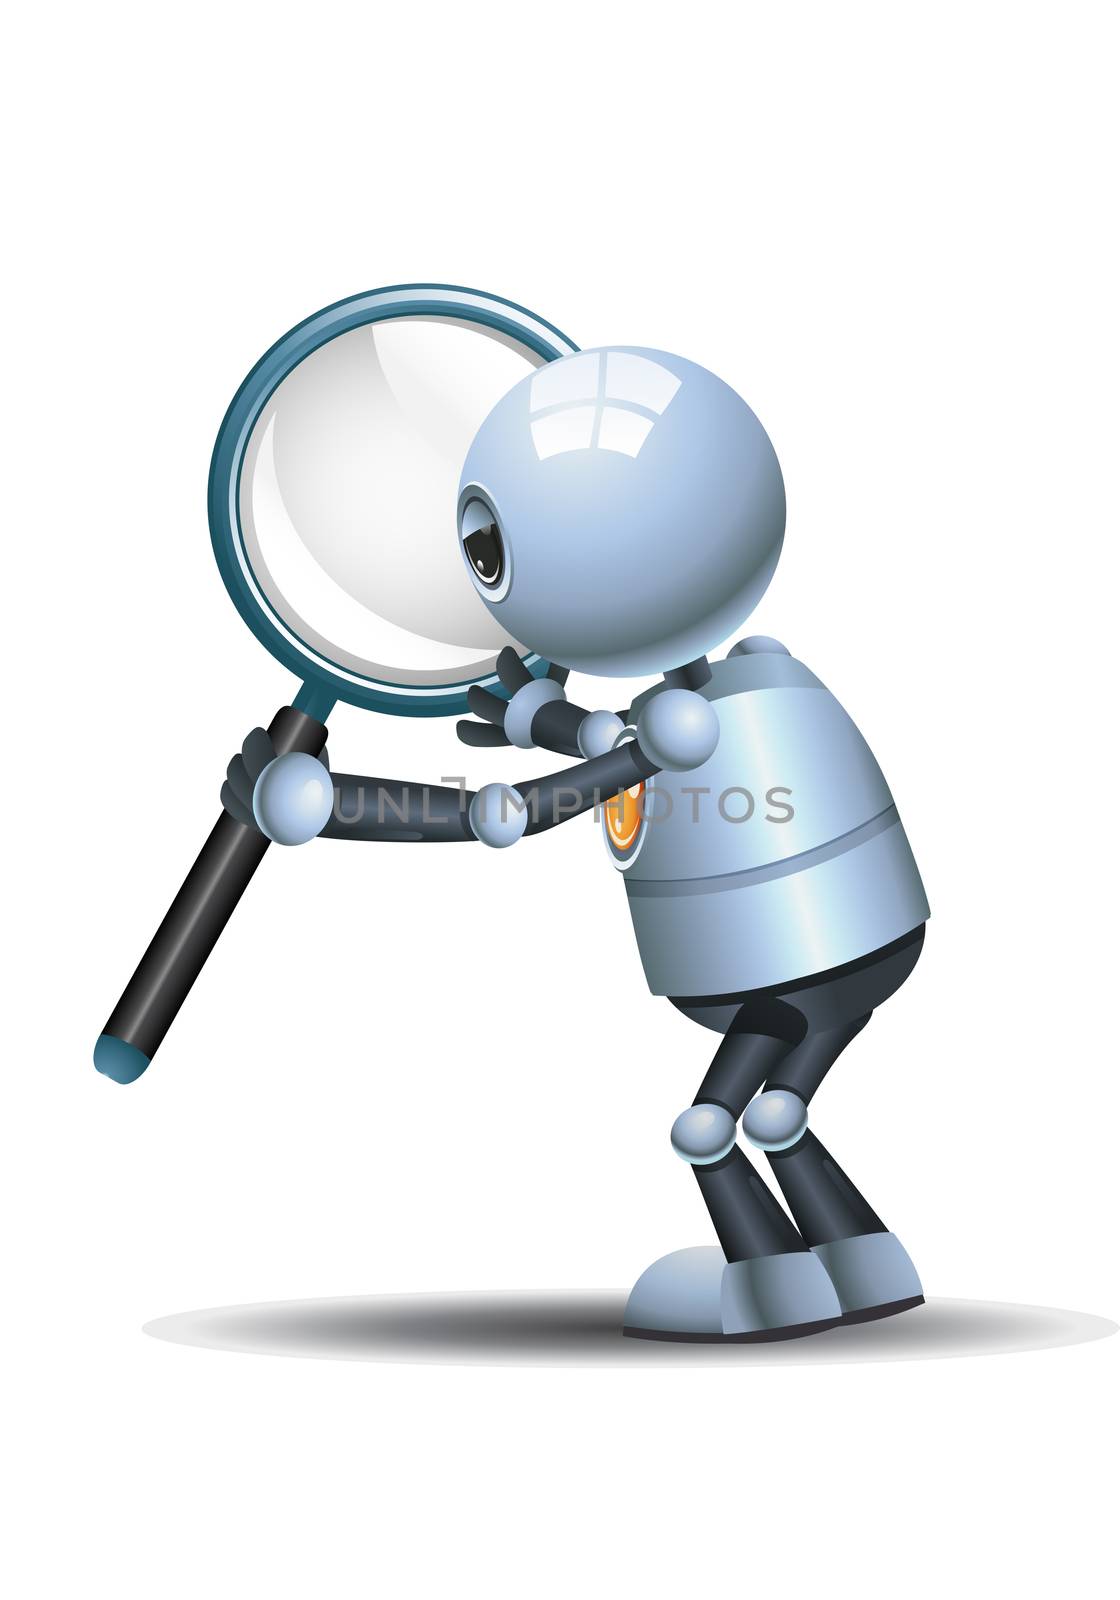 little robot hold magnifier glass searching something by onime